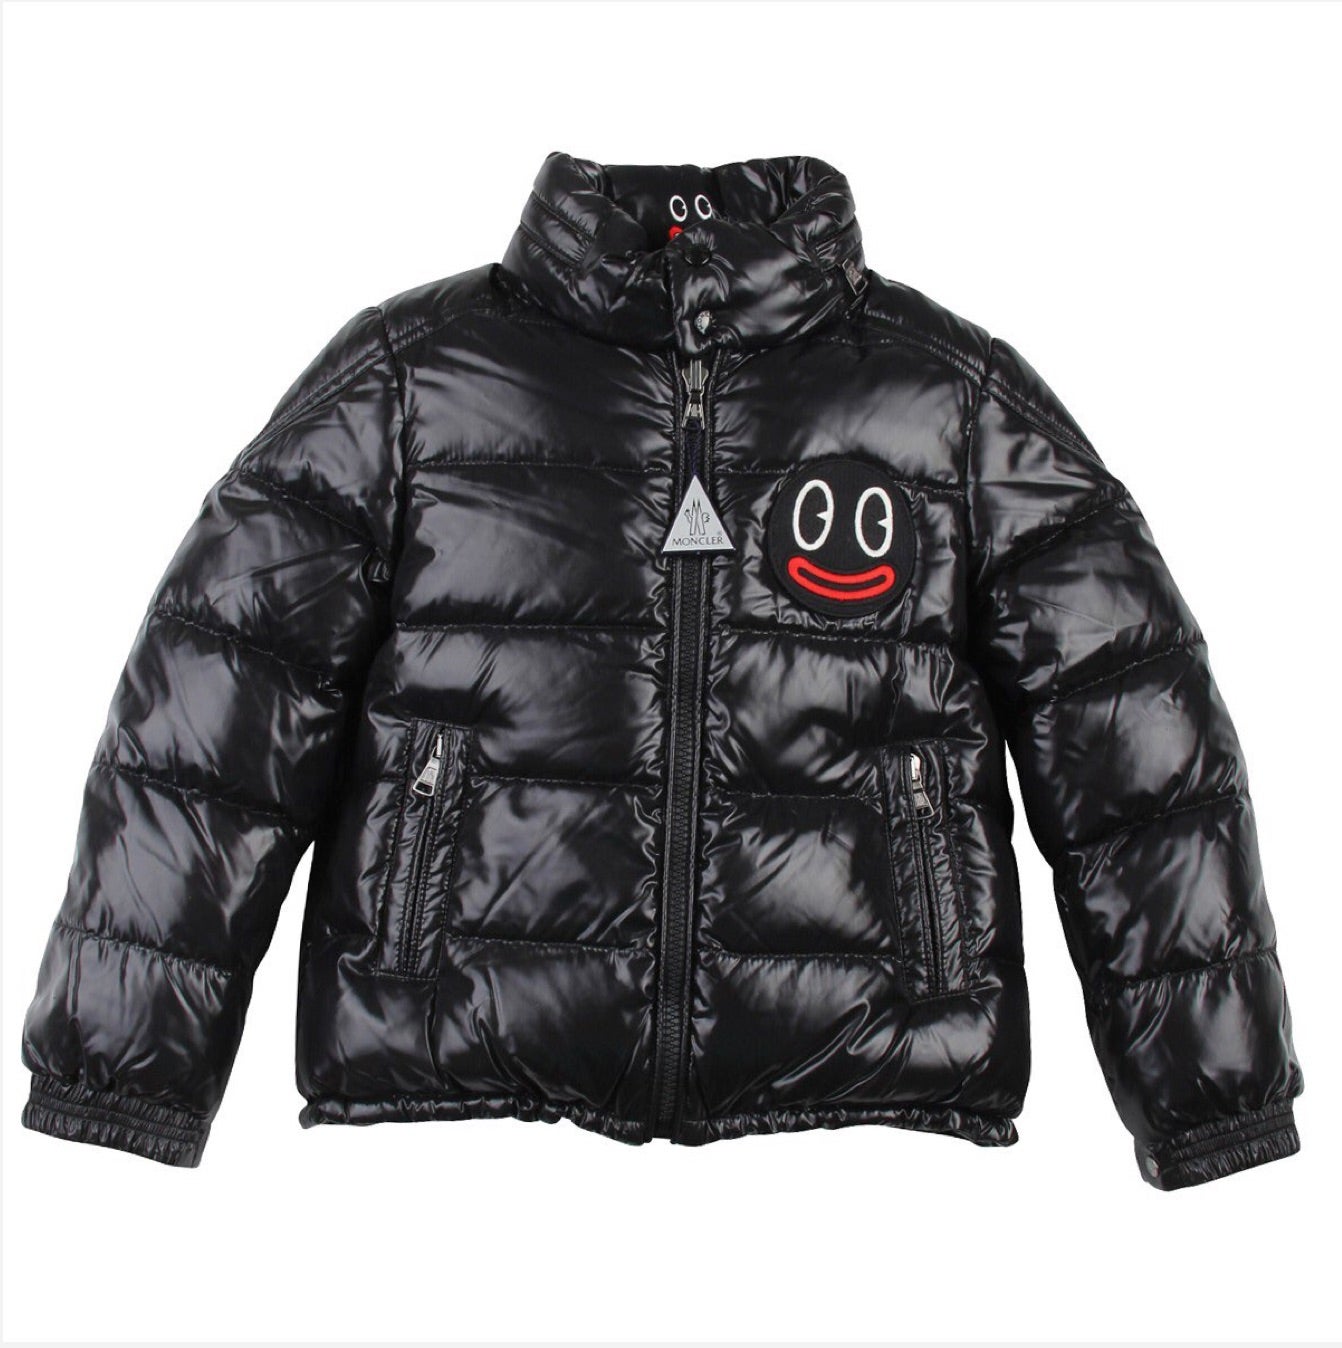 Moncler is Selling a Jacket With Blackface on it, Racist or Nah? (UPDATE)